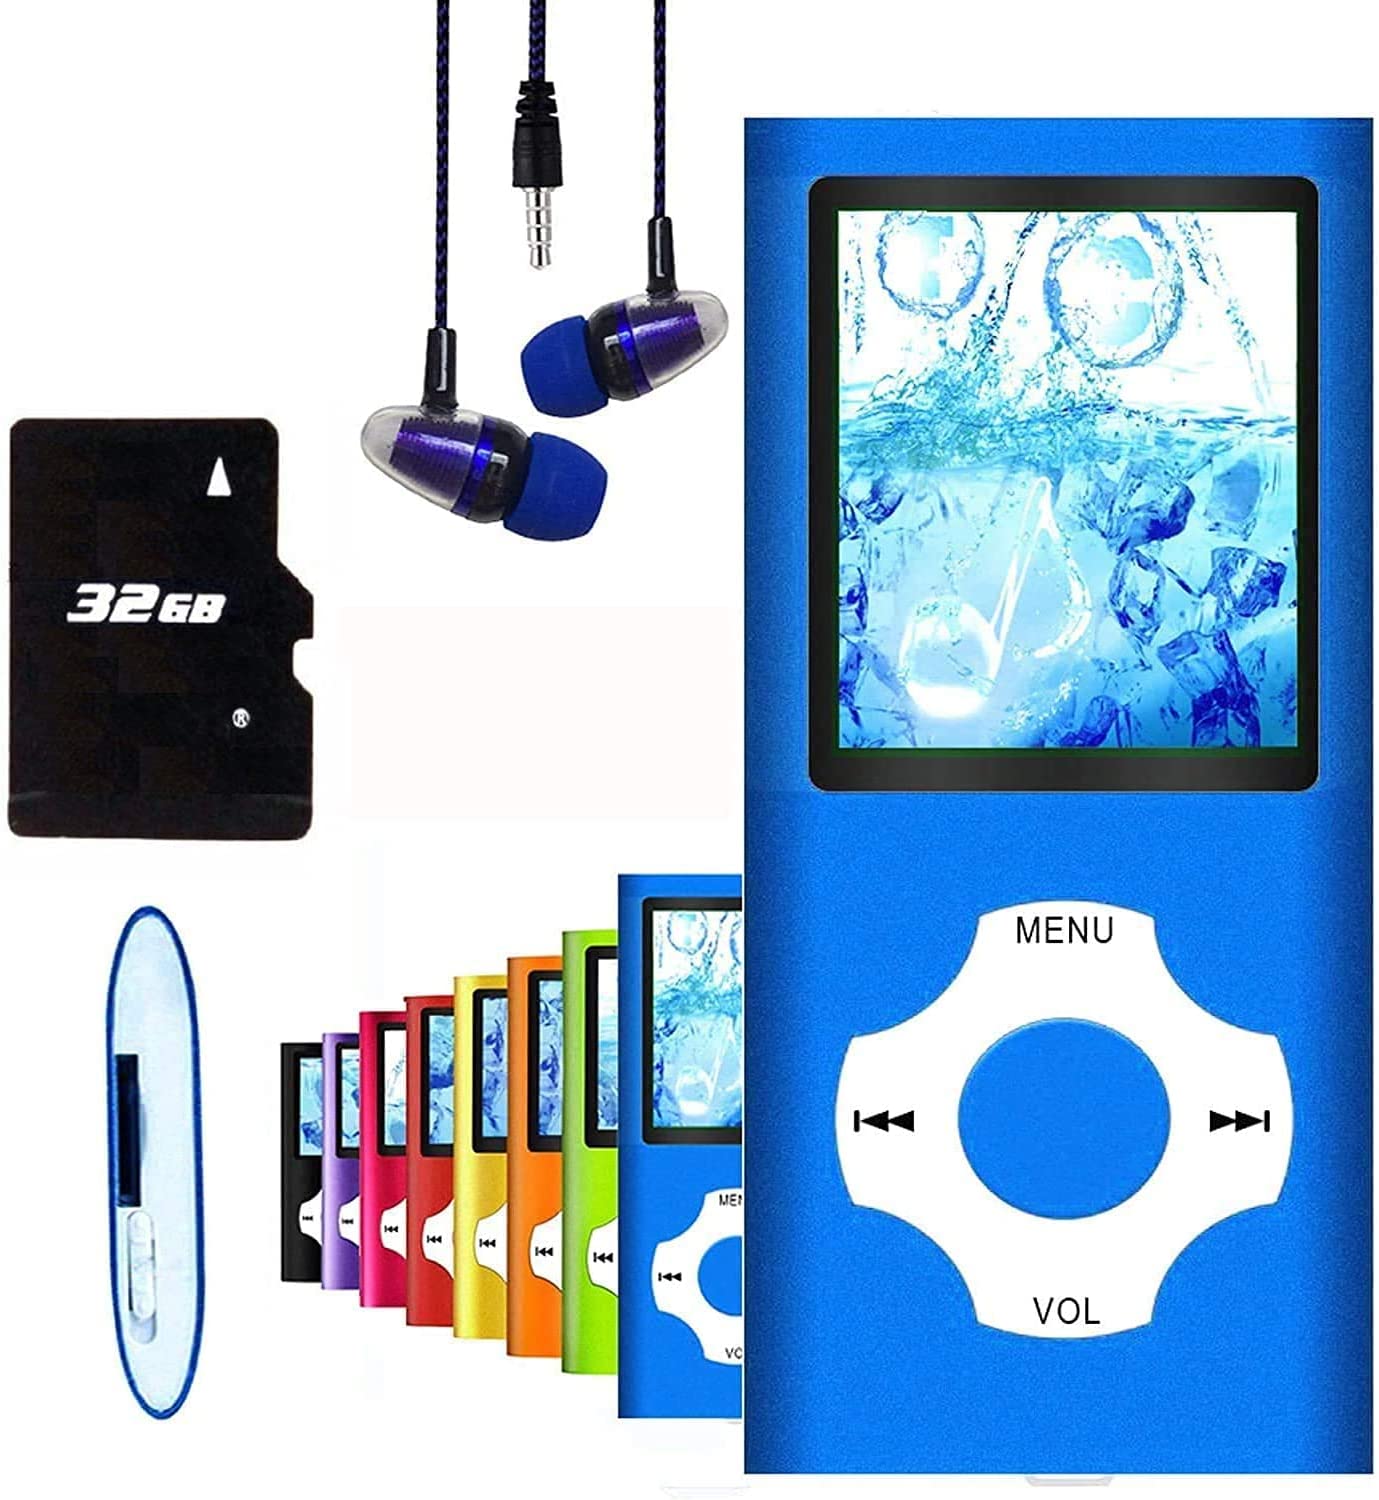 Hotechs Portable Noise Canceling MP3 Player, 32GB